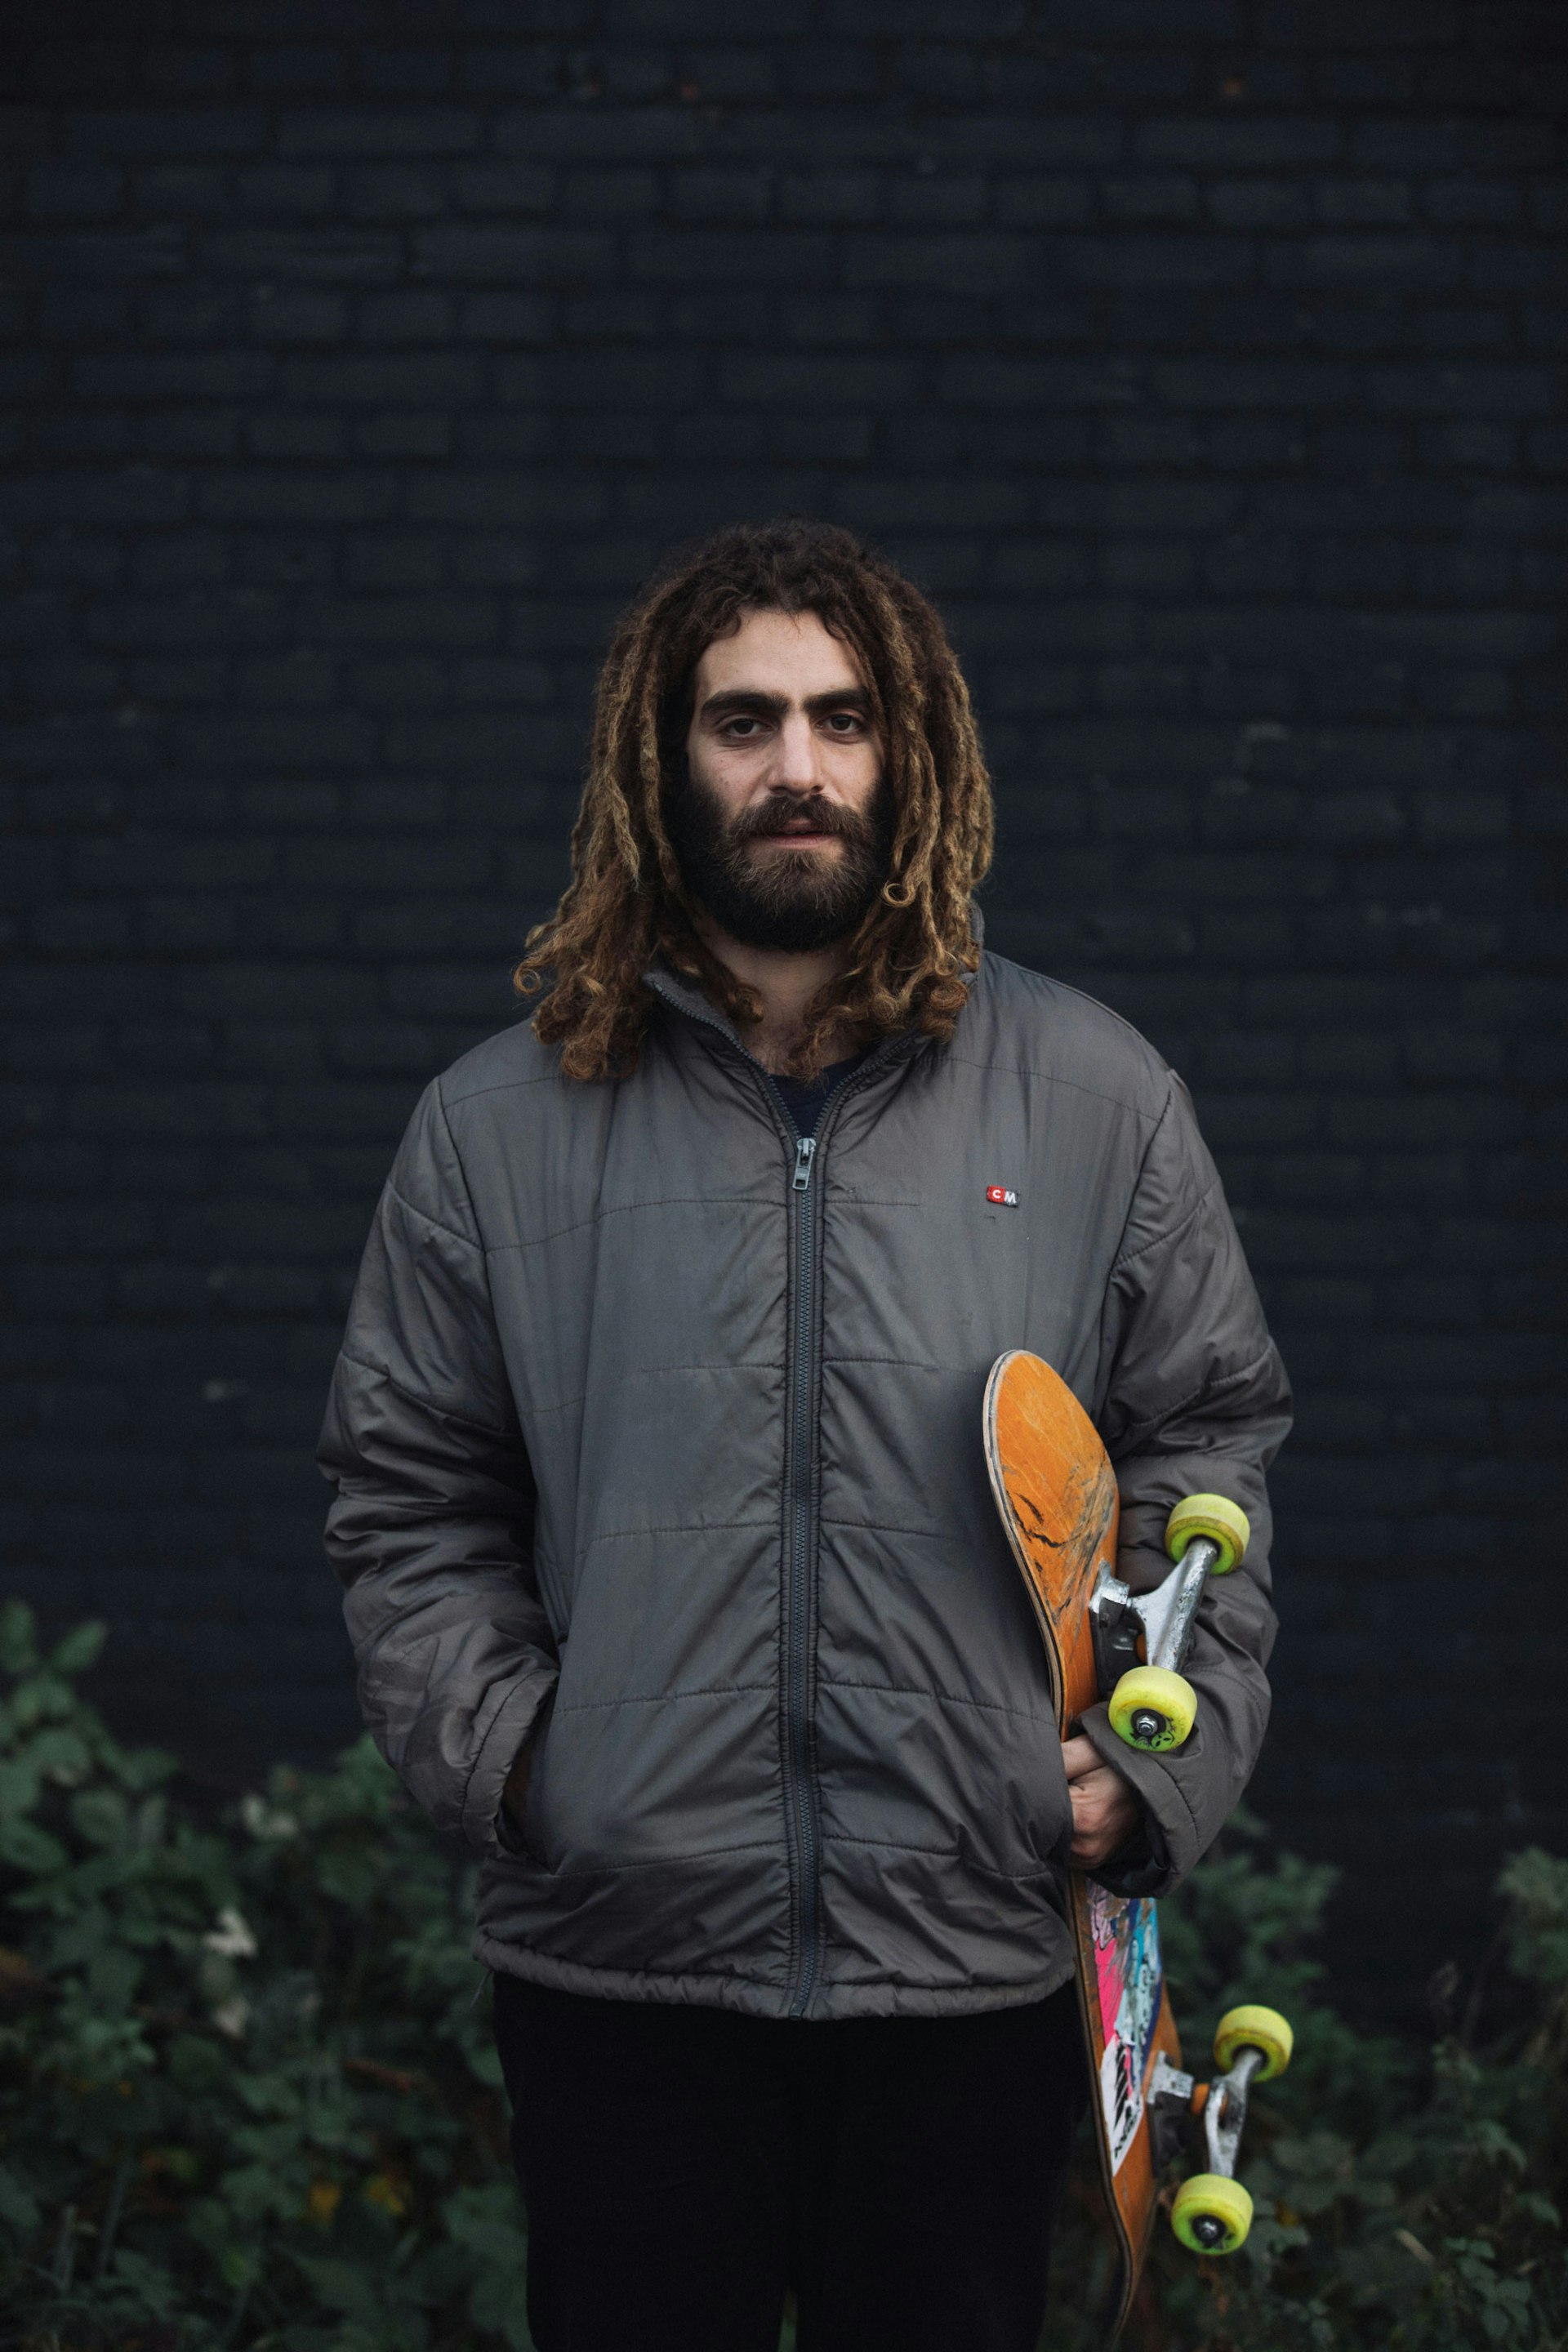 Itamar Kessler, 25, Gilis (Israel). "When you introduce yourself to skating, you go to a skate shop, you meet people and that vibe puts an imprint on you. I used to work in a skate shop; if you go to a good one and keep buying there, that gives you a much better education than just buying online."